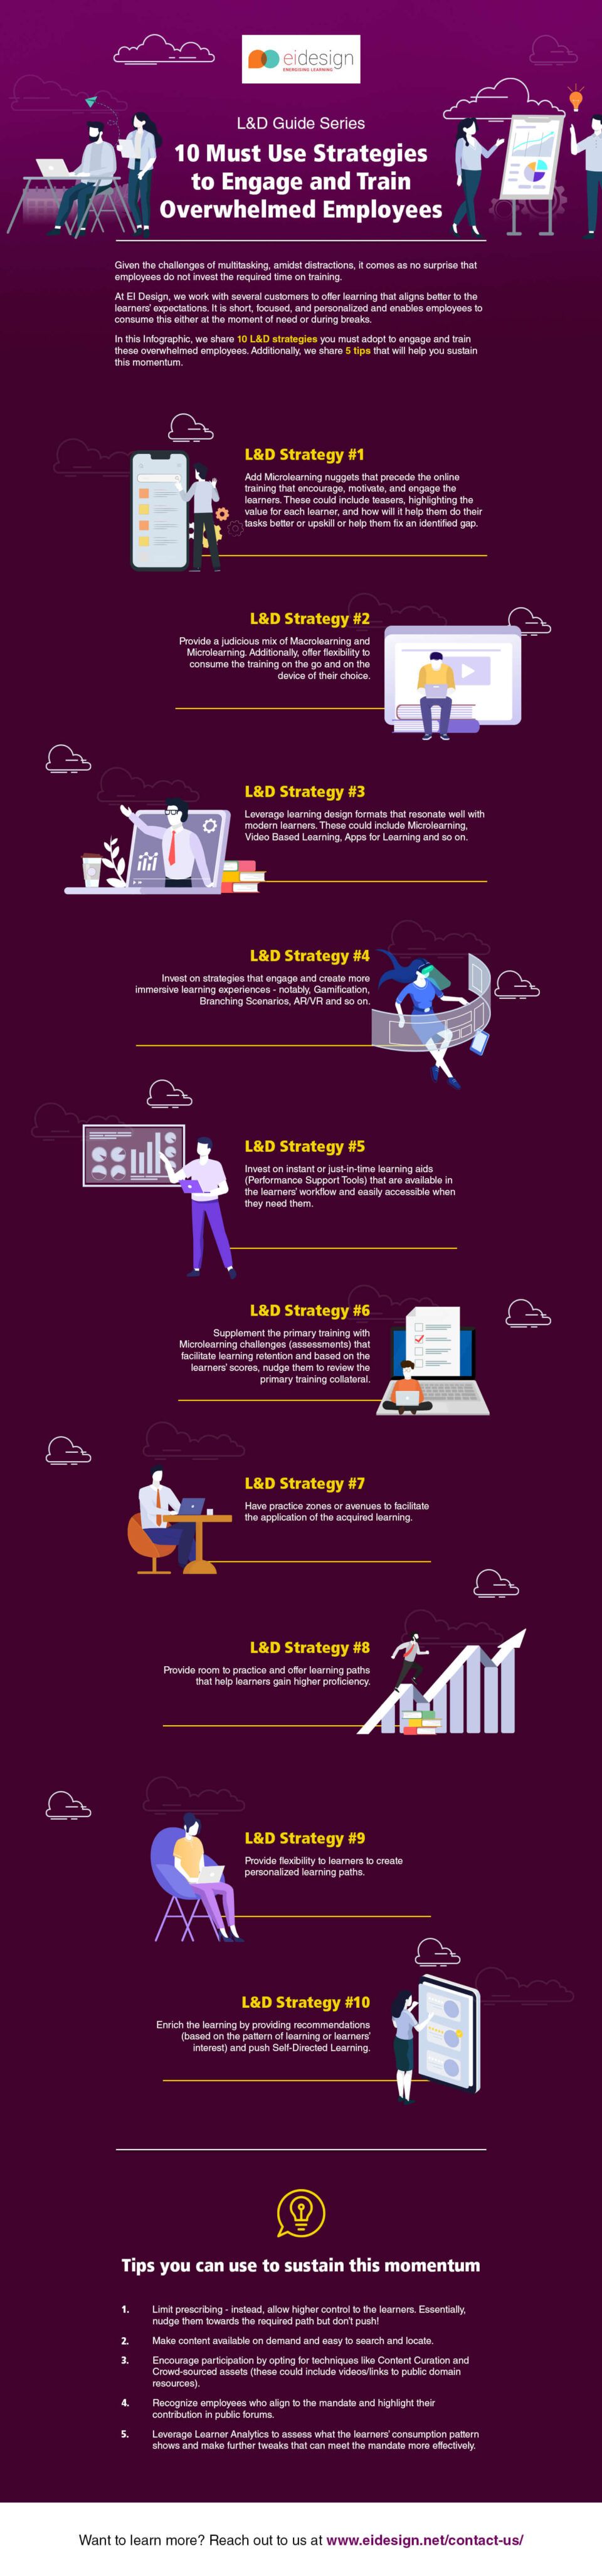 10 Must Use Strategies to Engage and Train the Overwhelmed Employees Infographic